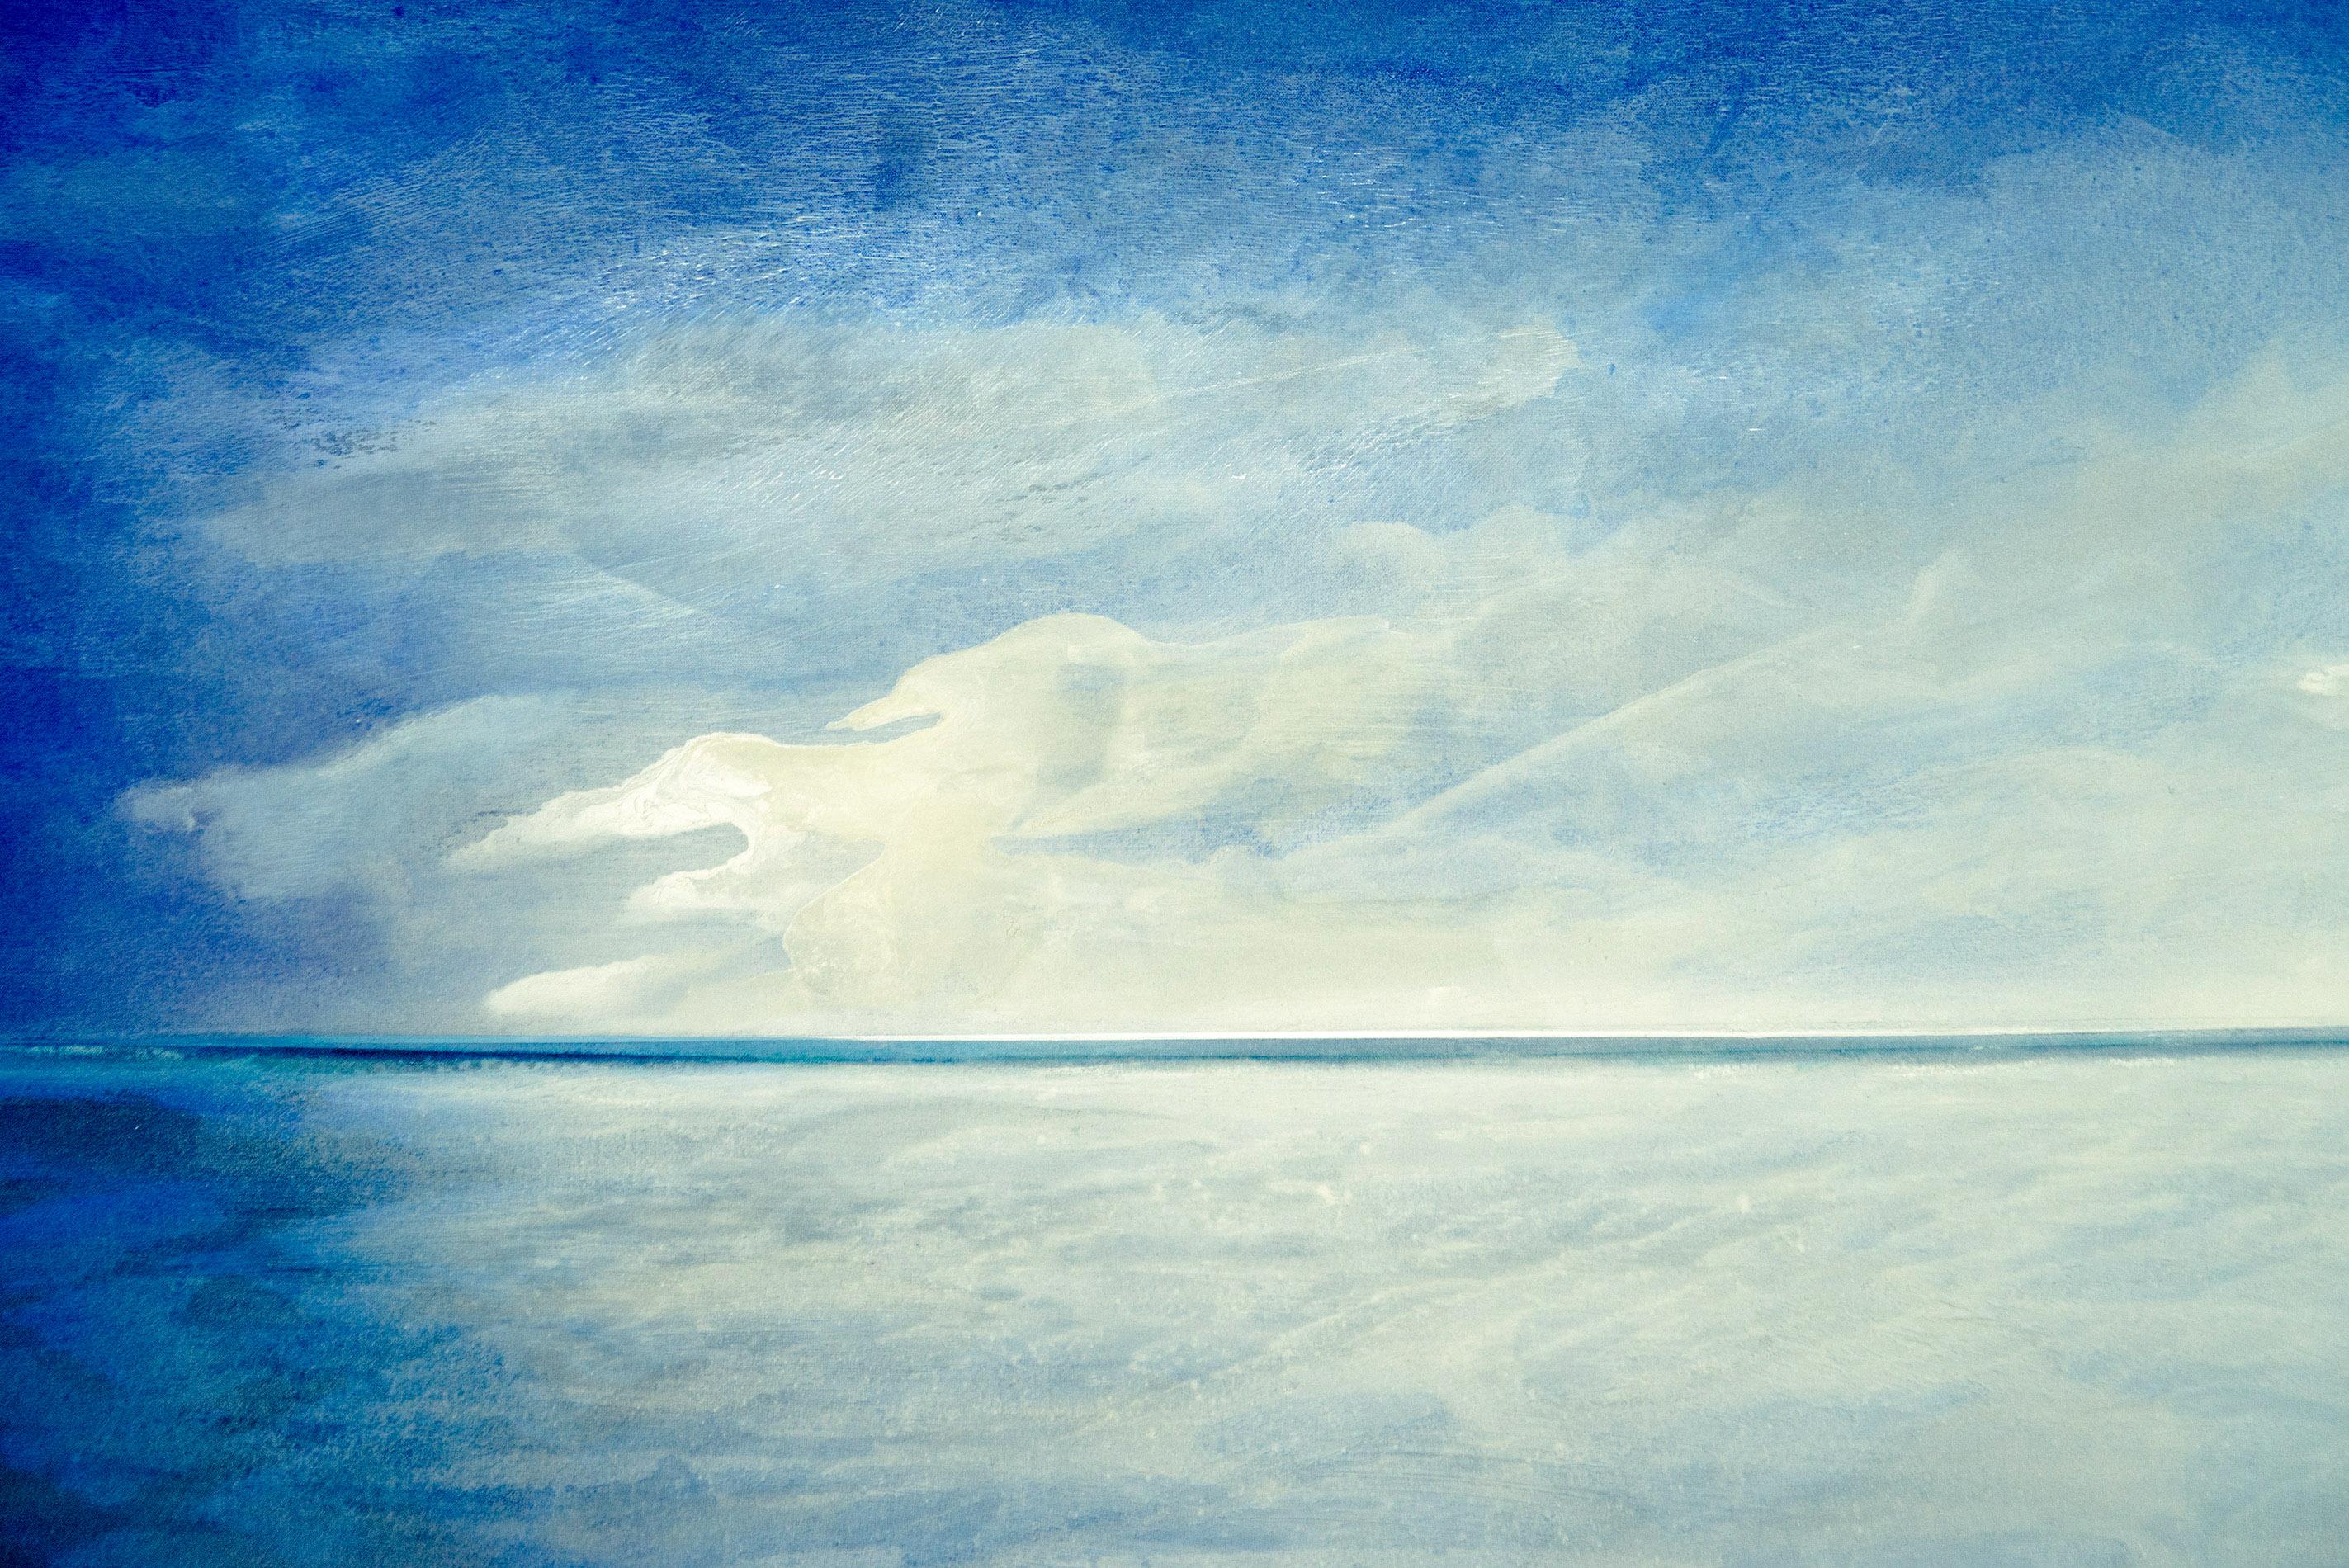 Awaken - cool, gestural, seascape - Contemporary Painting by Sasha Rogers